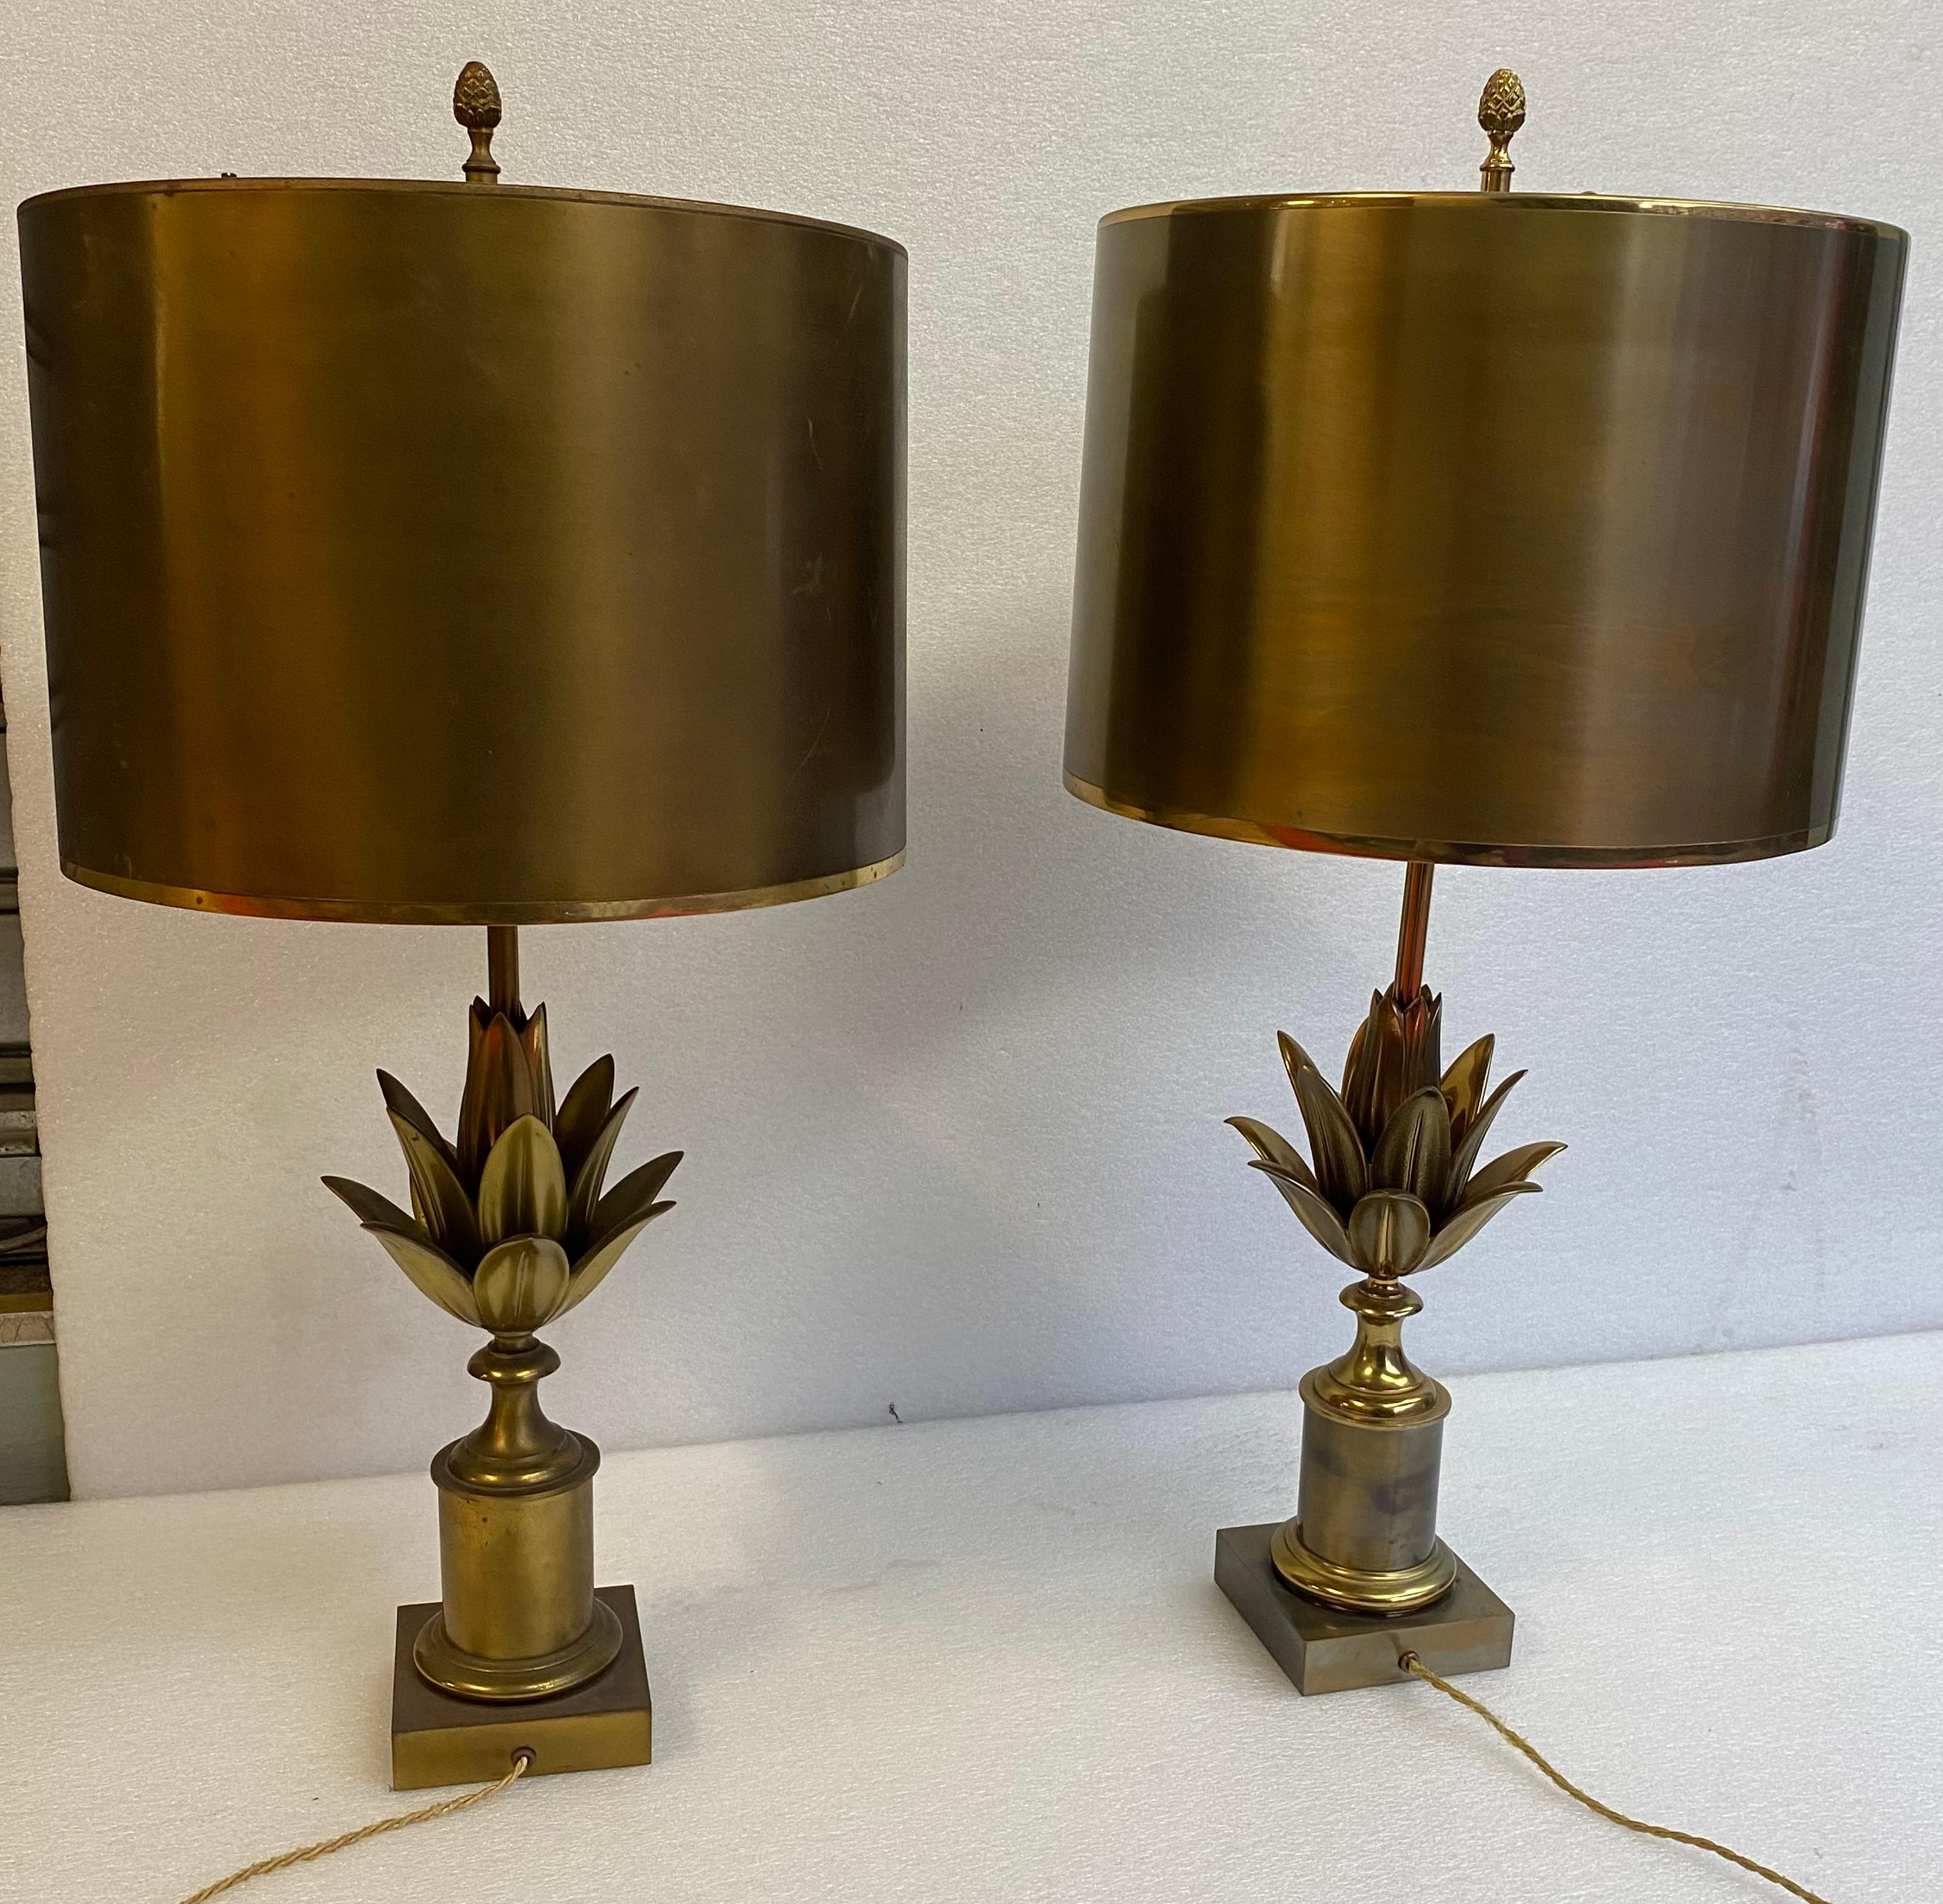 Pair of Lamps or similar Lotus Flower model in bronze signed Charles, made in France, brass lampshade with polished threads, adjustable in height, 5 cm more.
Top Diameter: 35 cm
Bottom Diameter: 35 cm
Height of the lampshade 25 cm
3 E27 screw bulbs